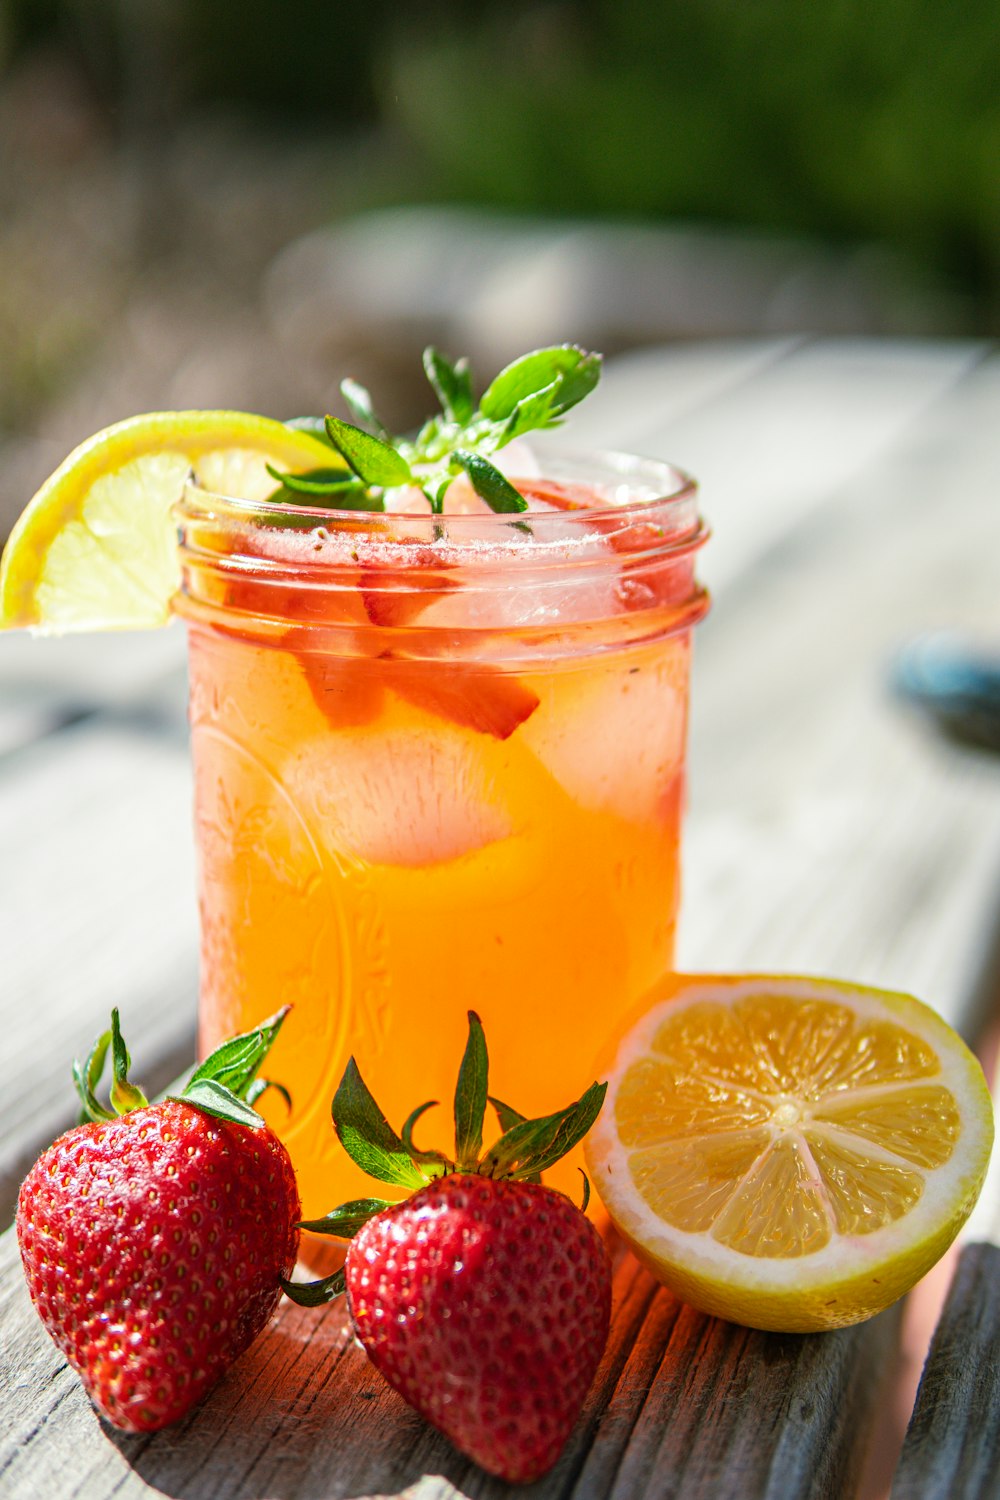 a glass of lemonade and strawberries on a wooden table